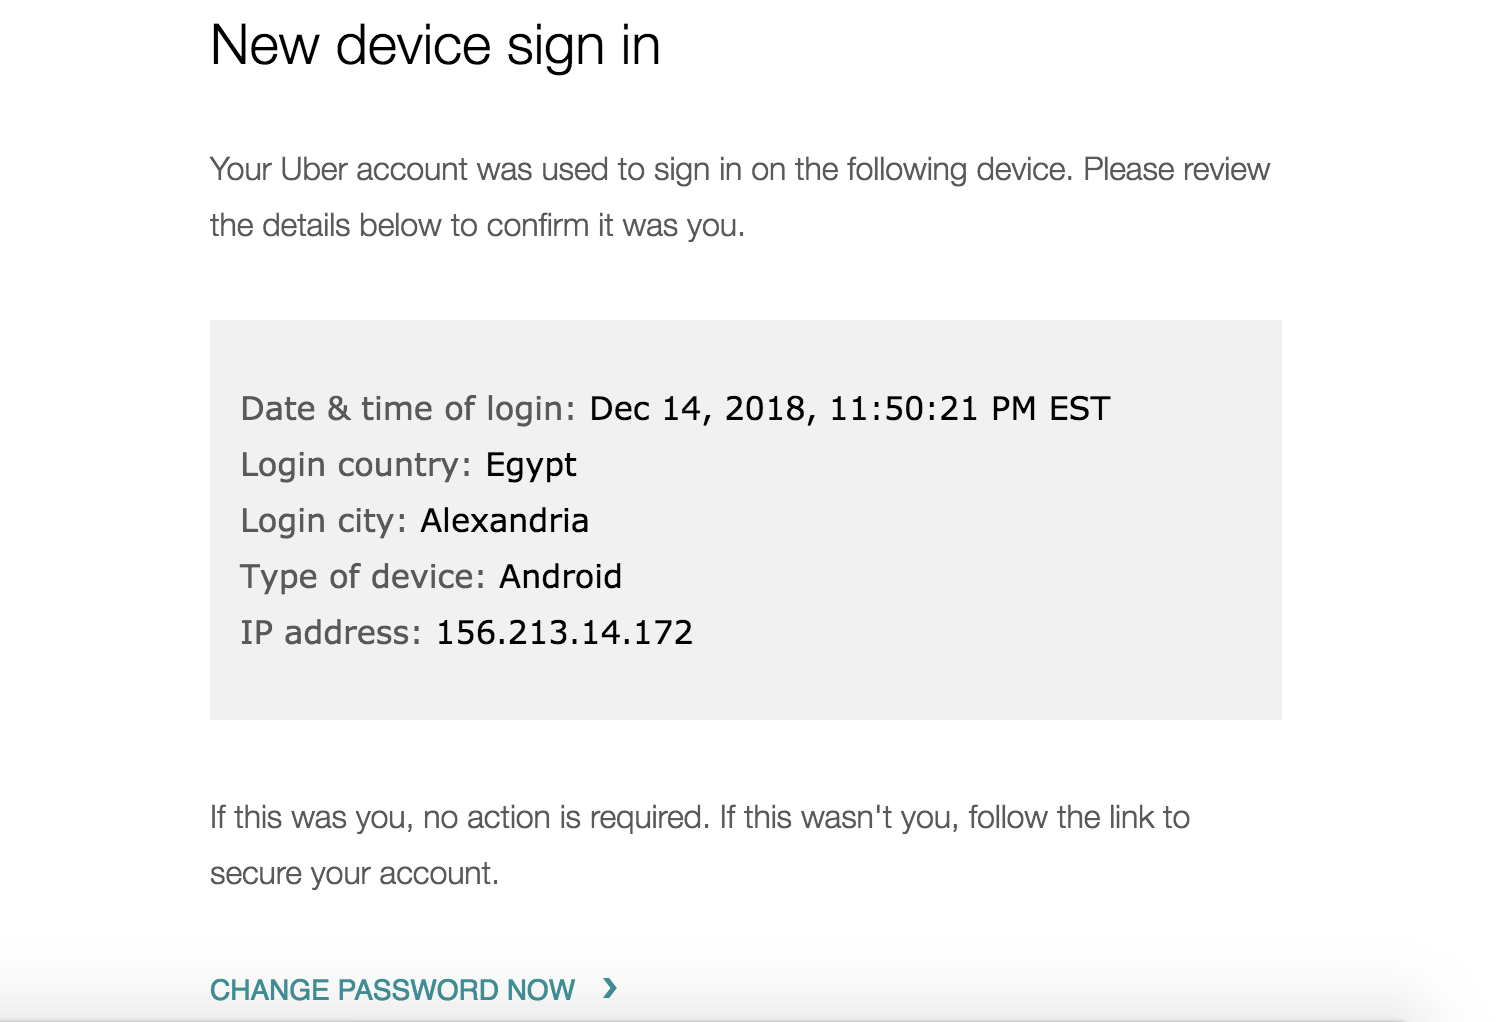 uber new device sign in password change